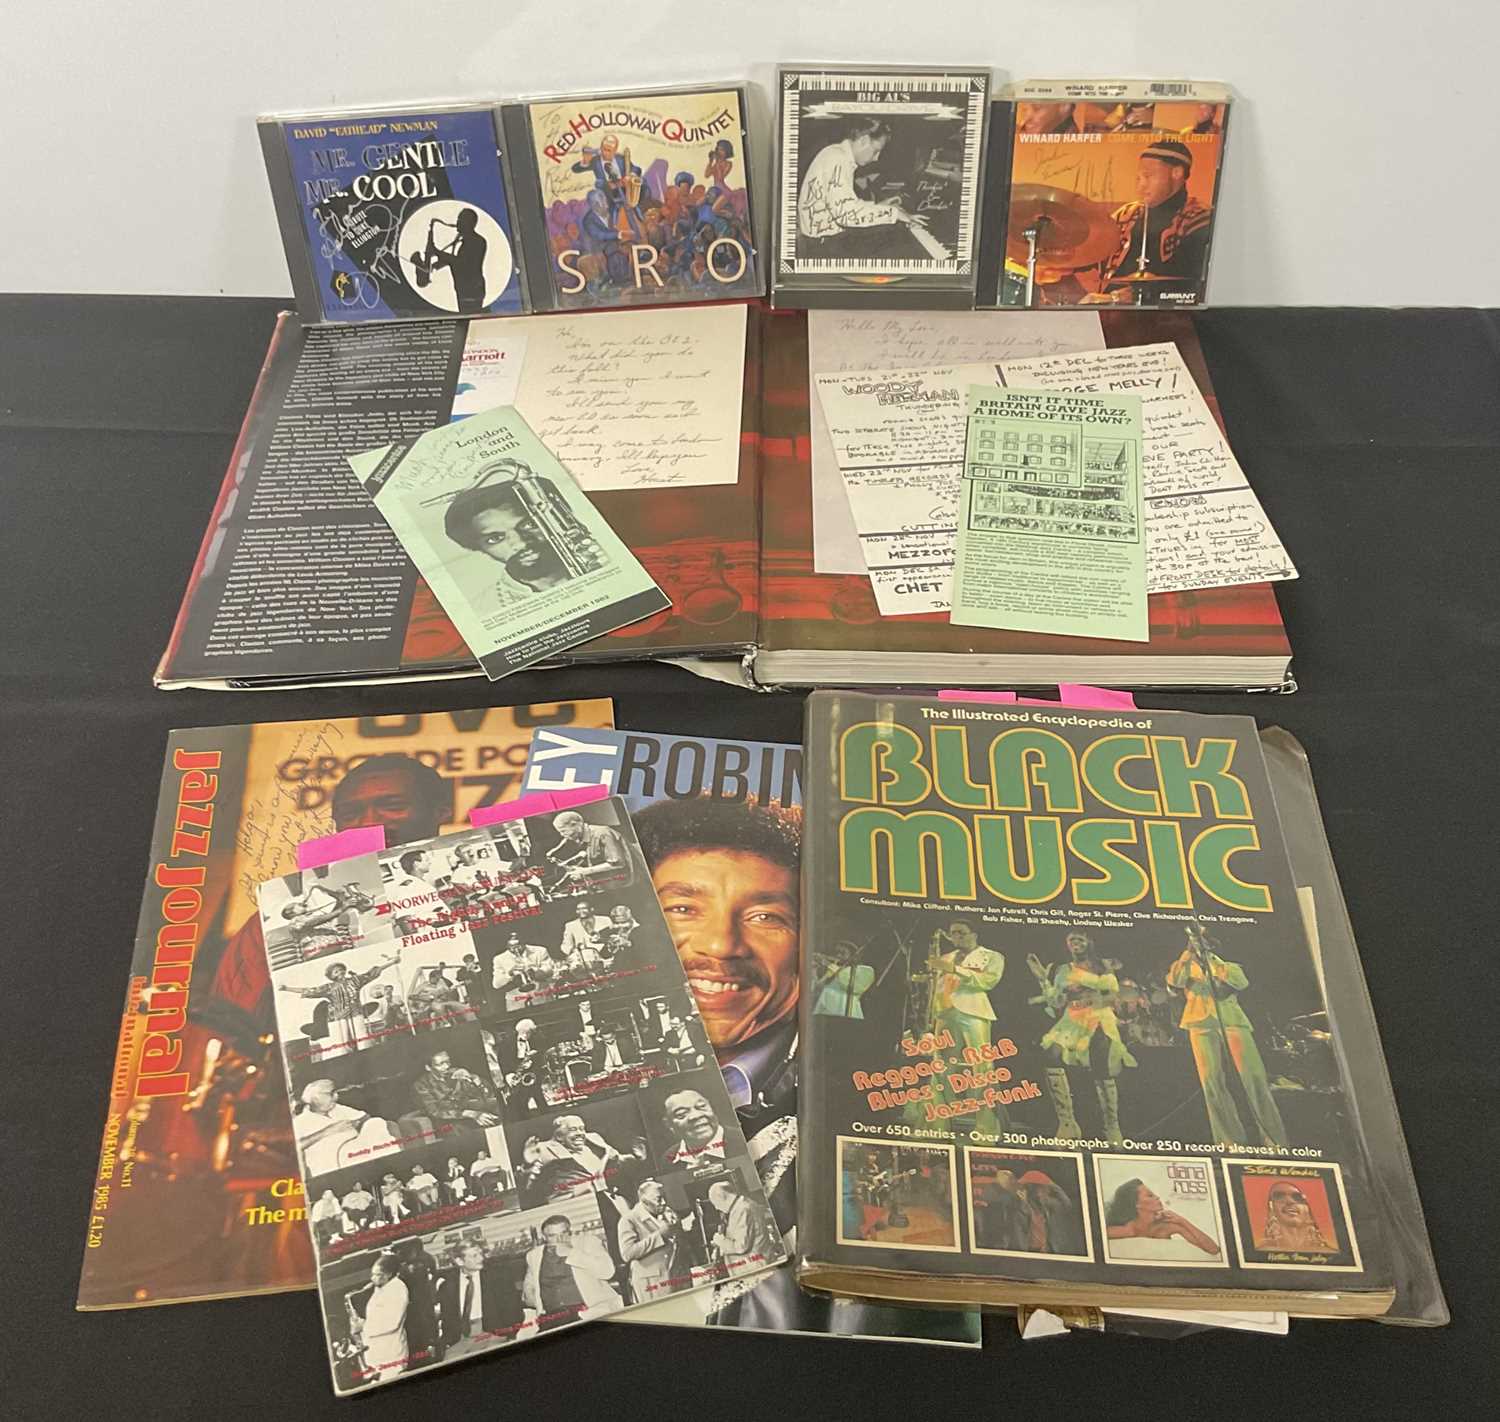 A collection of Jazz musician autographs to include a copy of The Illustrated Encyclopedia of